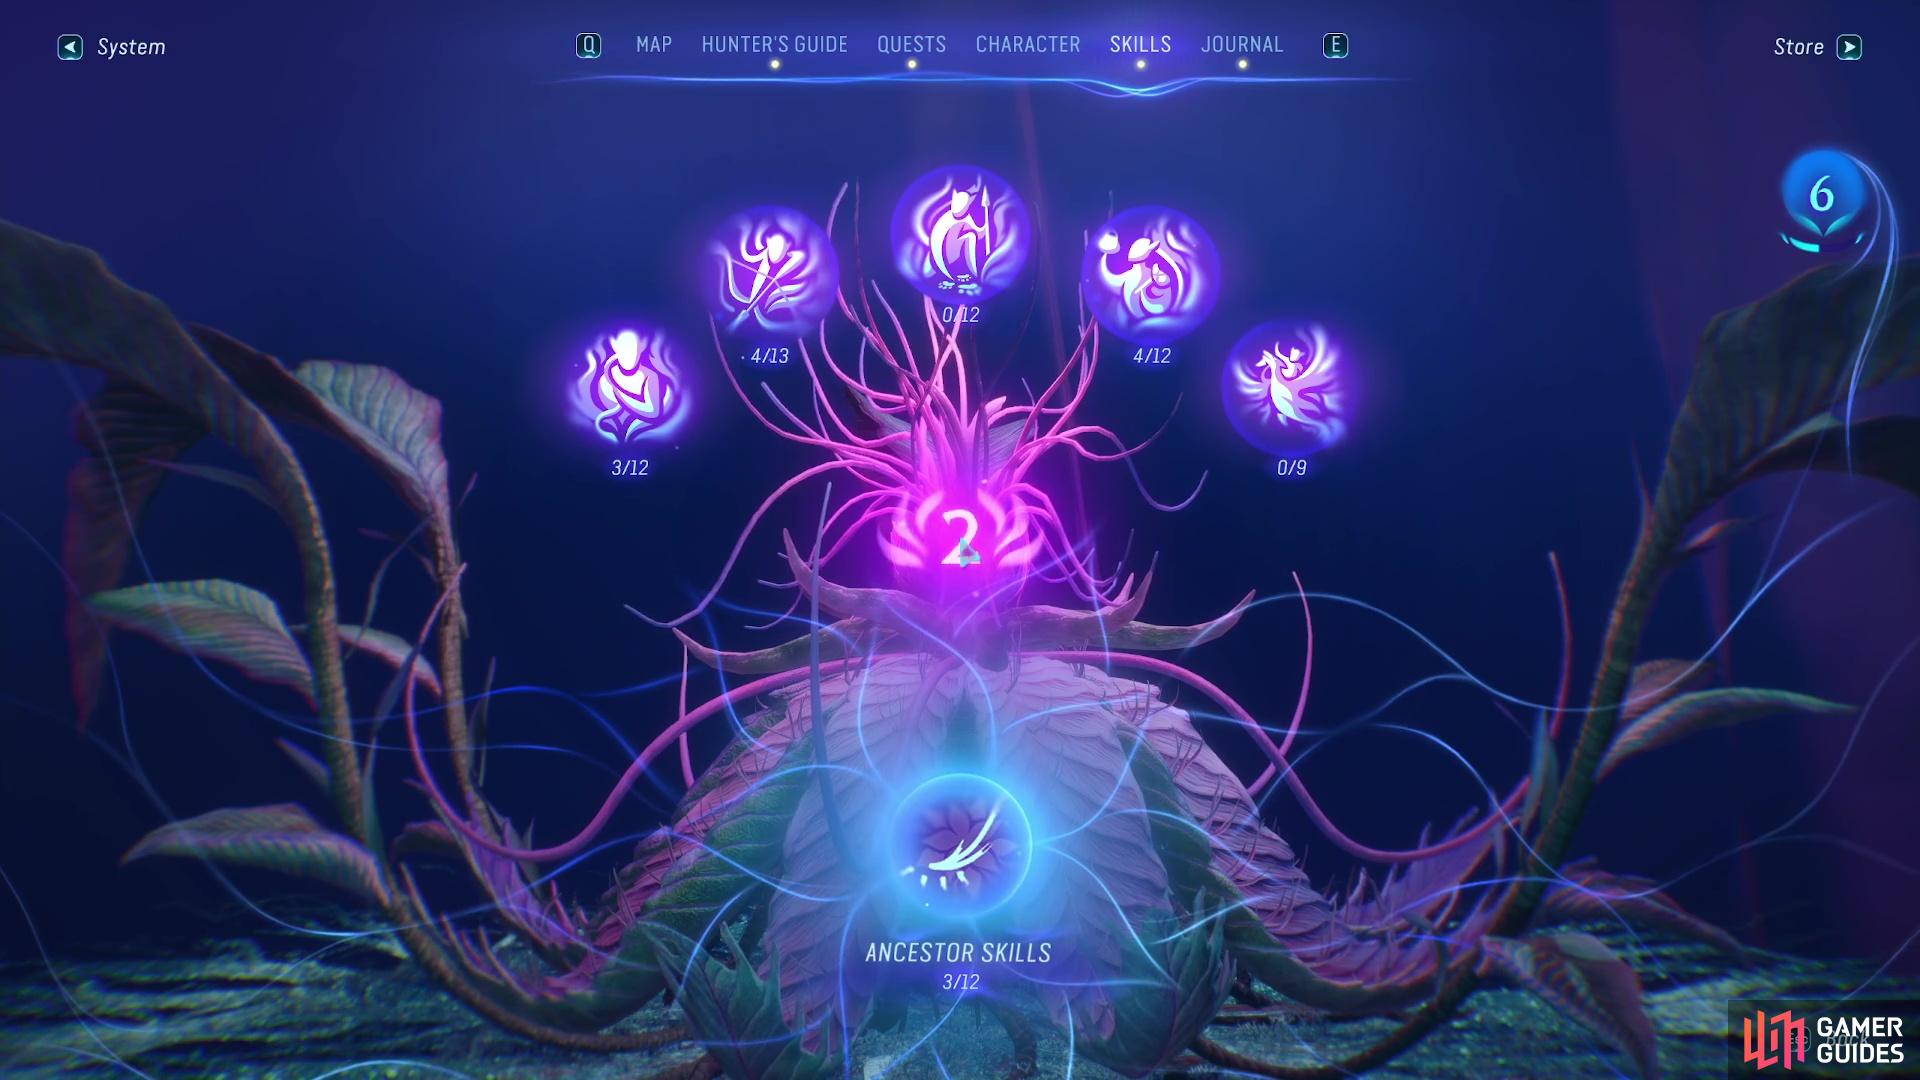 There’s five skill trees in Avatar: Frontiers of Pandora.